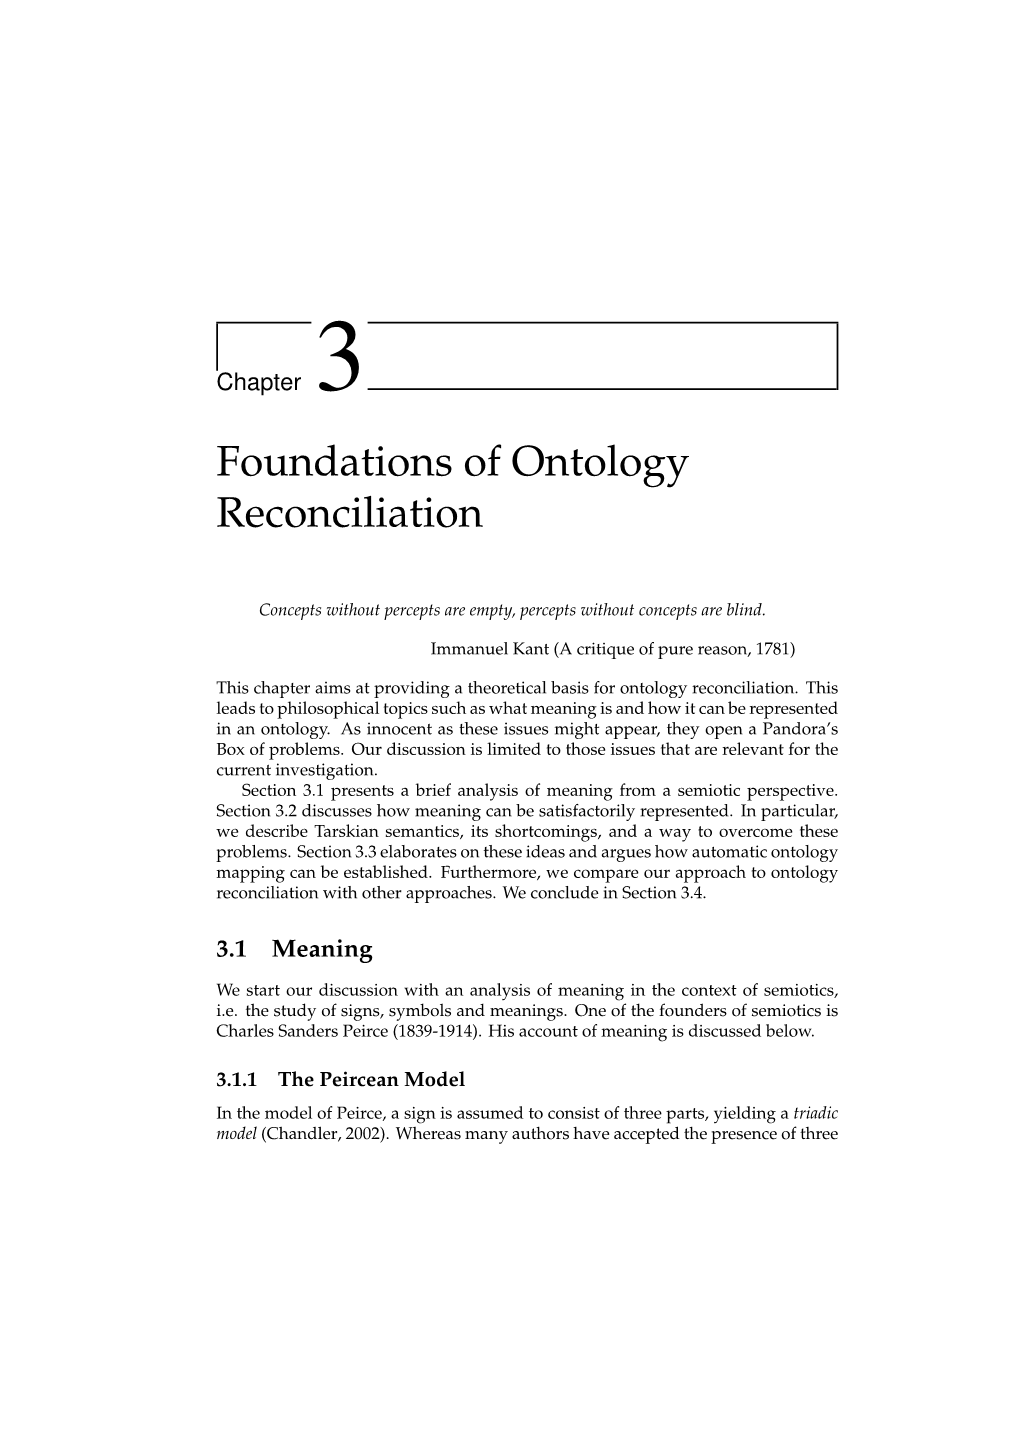 Foundations of Ontology Reconciliation